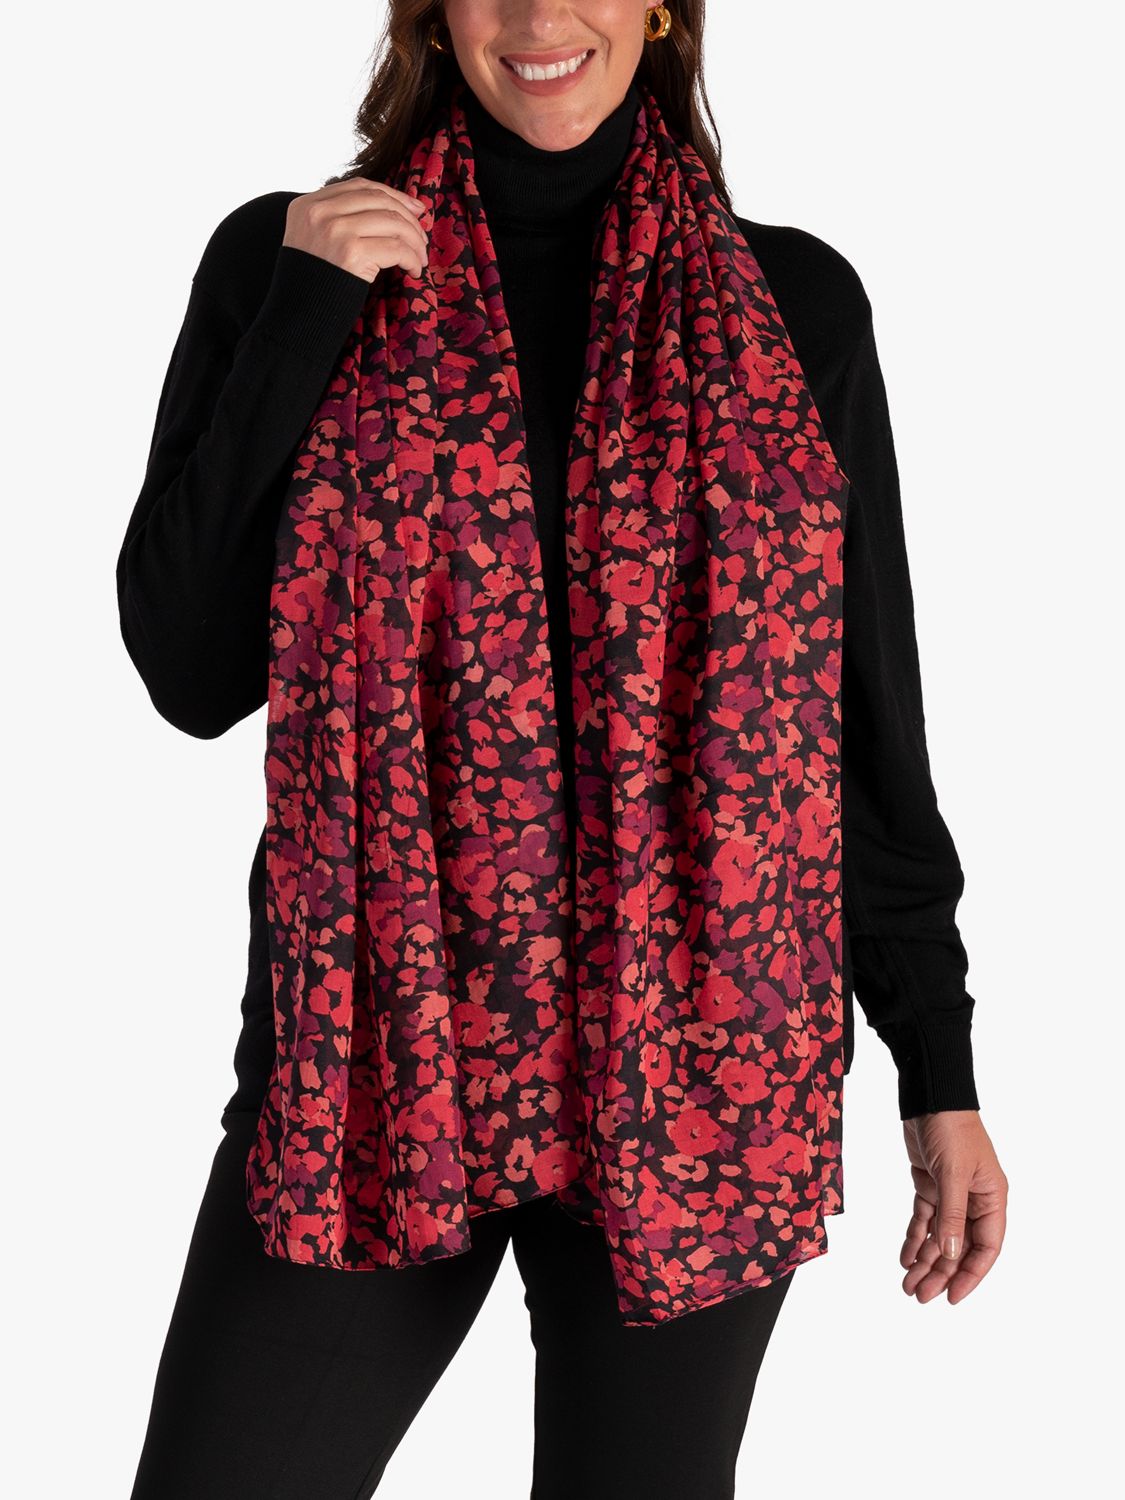 chesca Abstract Floral Leopard Print Scarf, Berry at John Lewis & Partners